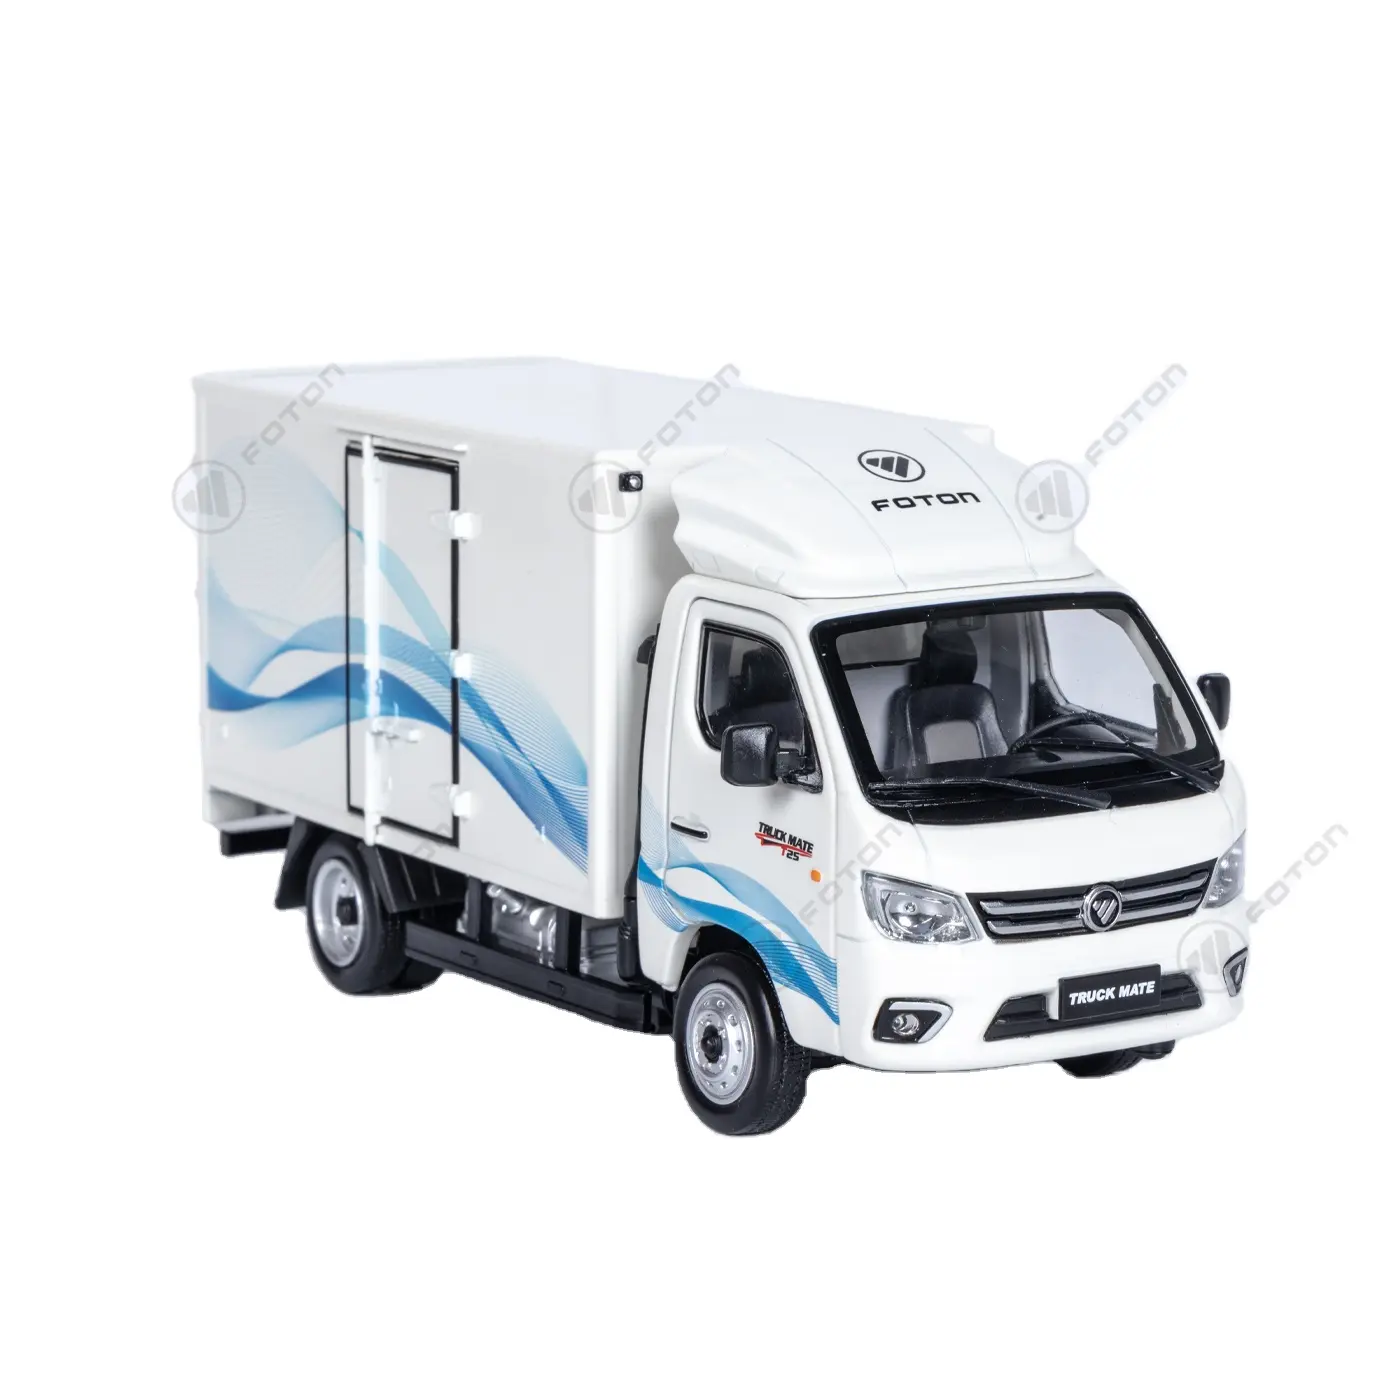 Foton Truck Mate Mini Truck Scale Model Car Promotional Gifts Items For Corporate AM701XL003